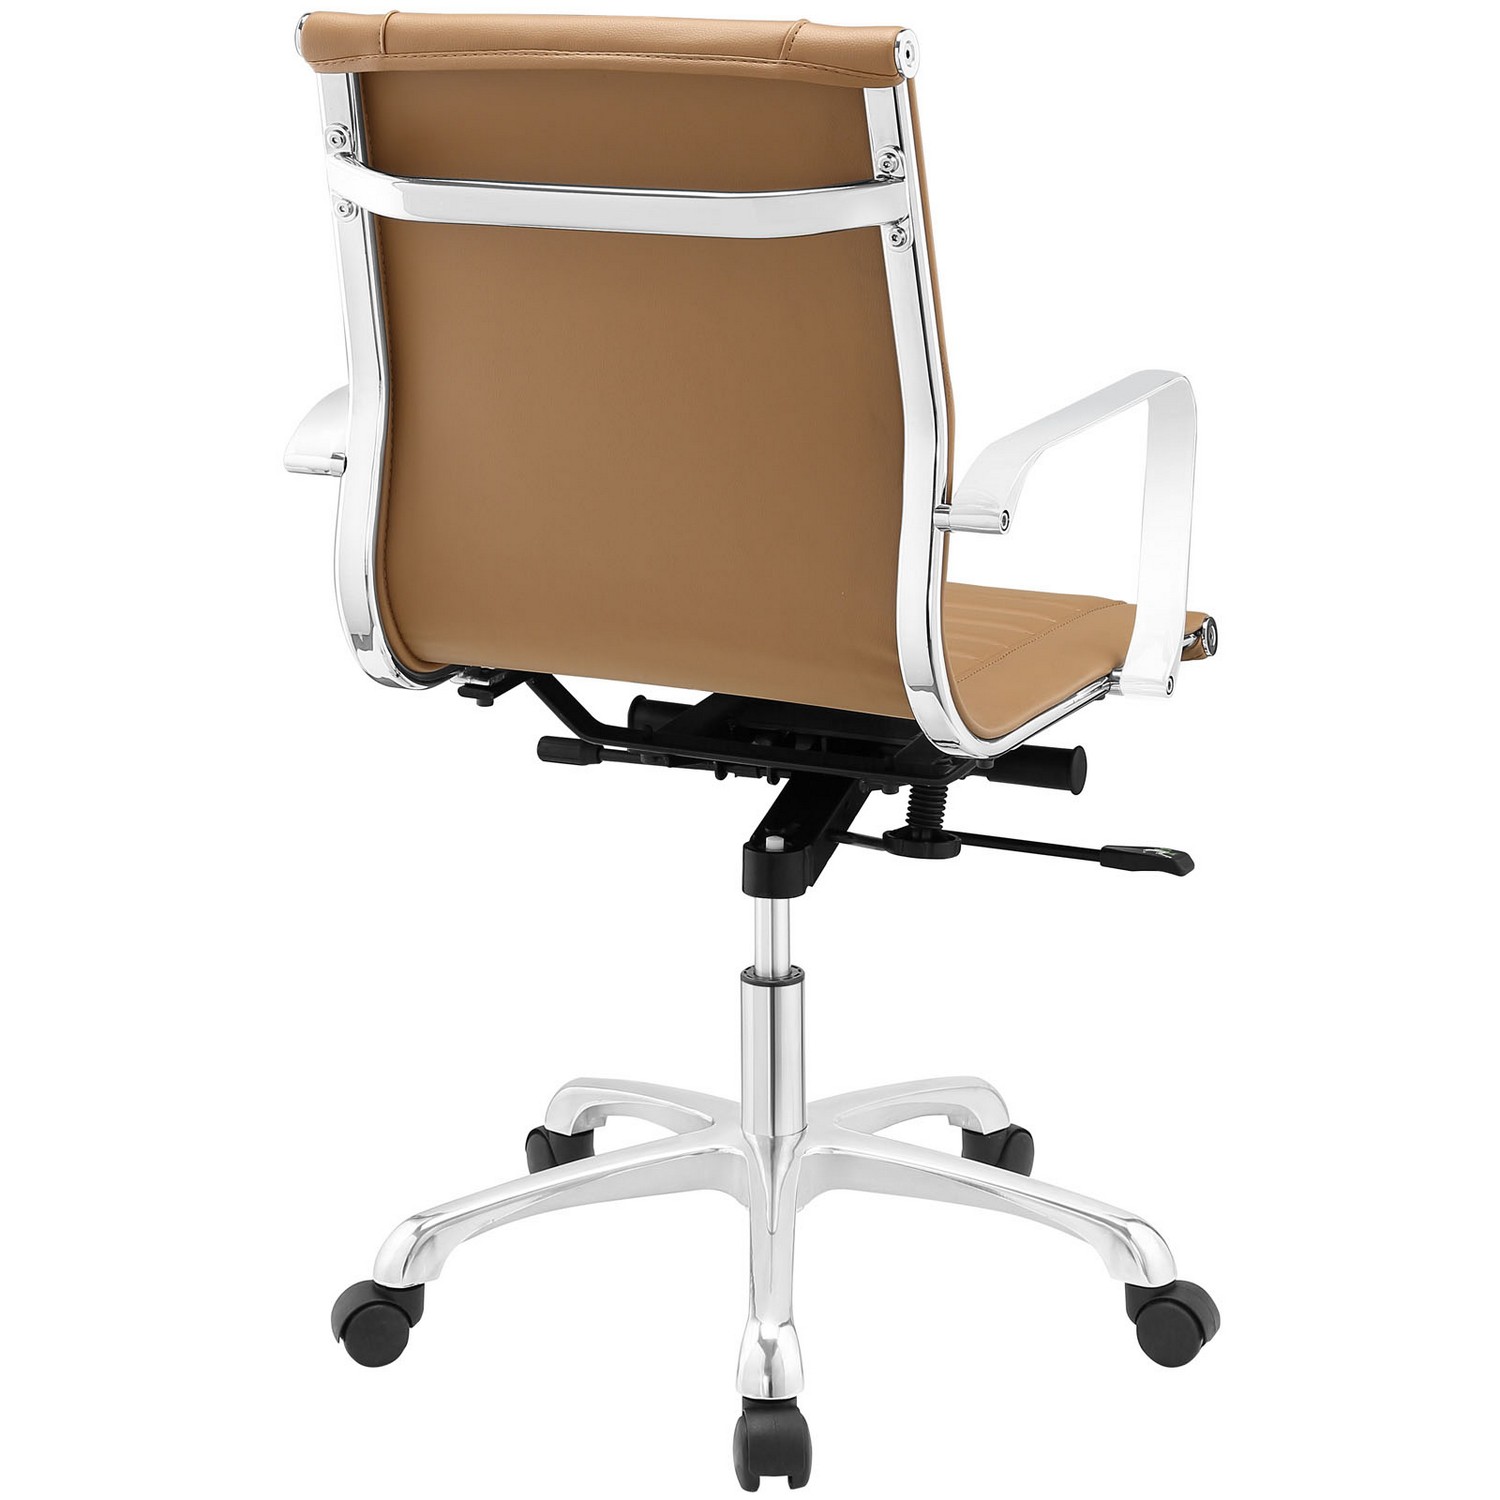 Modway Runway Mid Back Office Chair - Tan